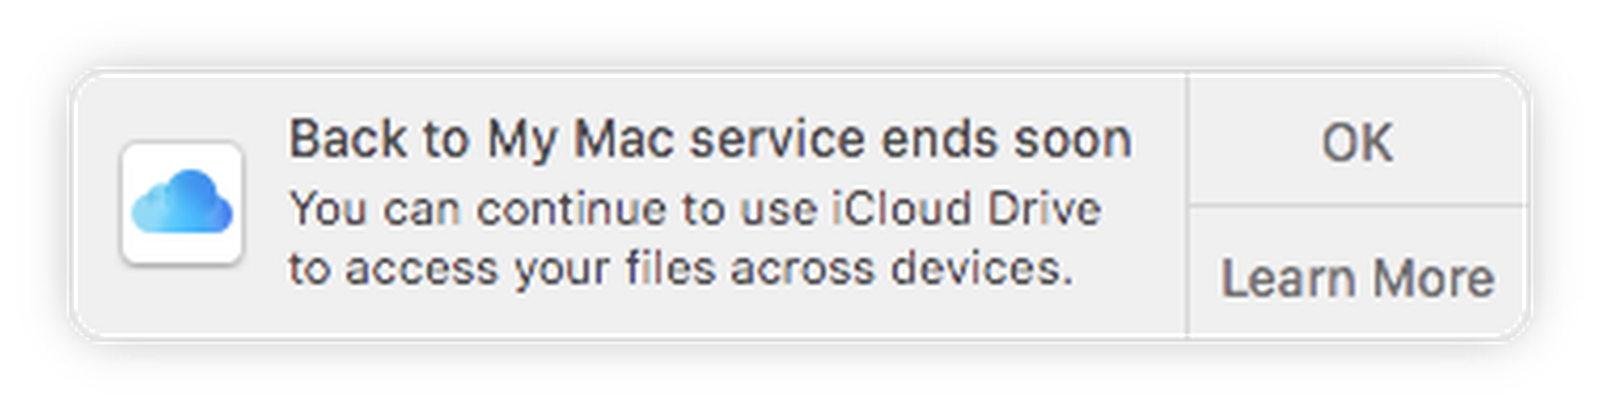 what is back to my mac option in icloud